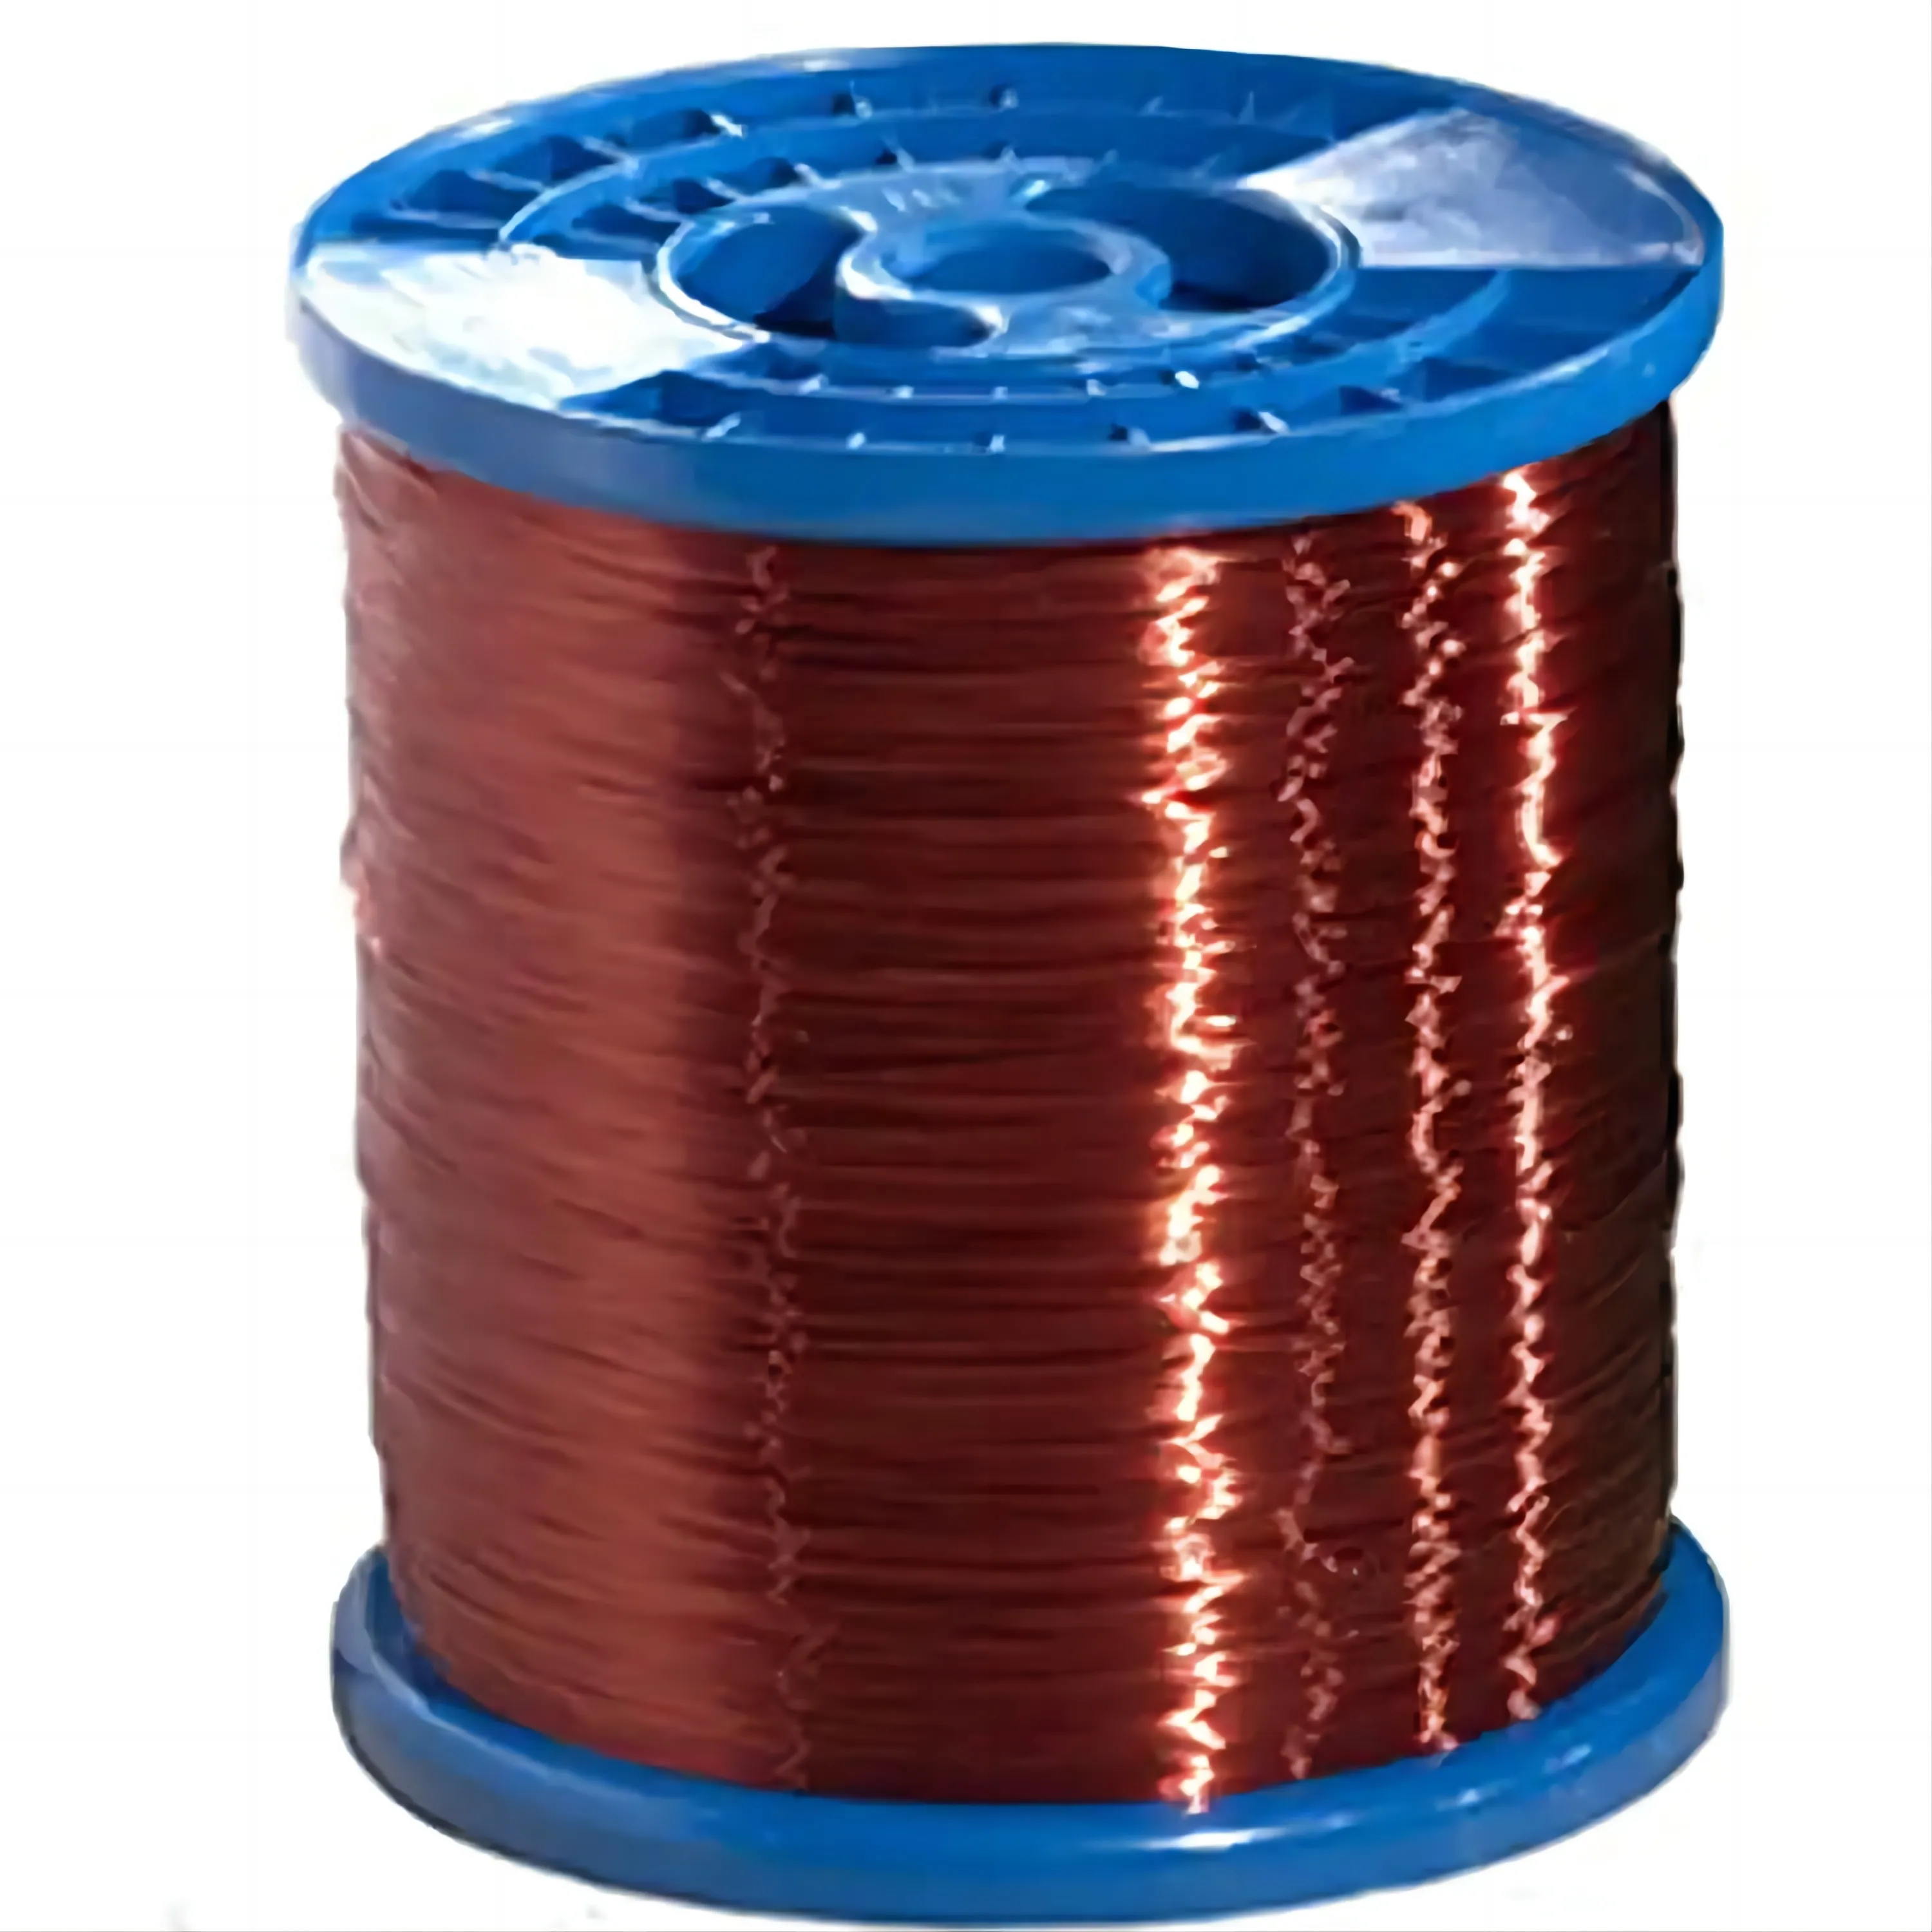 Top quality enameled copper wire for motor winding rewinding wire